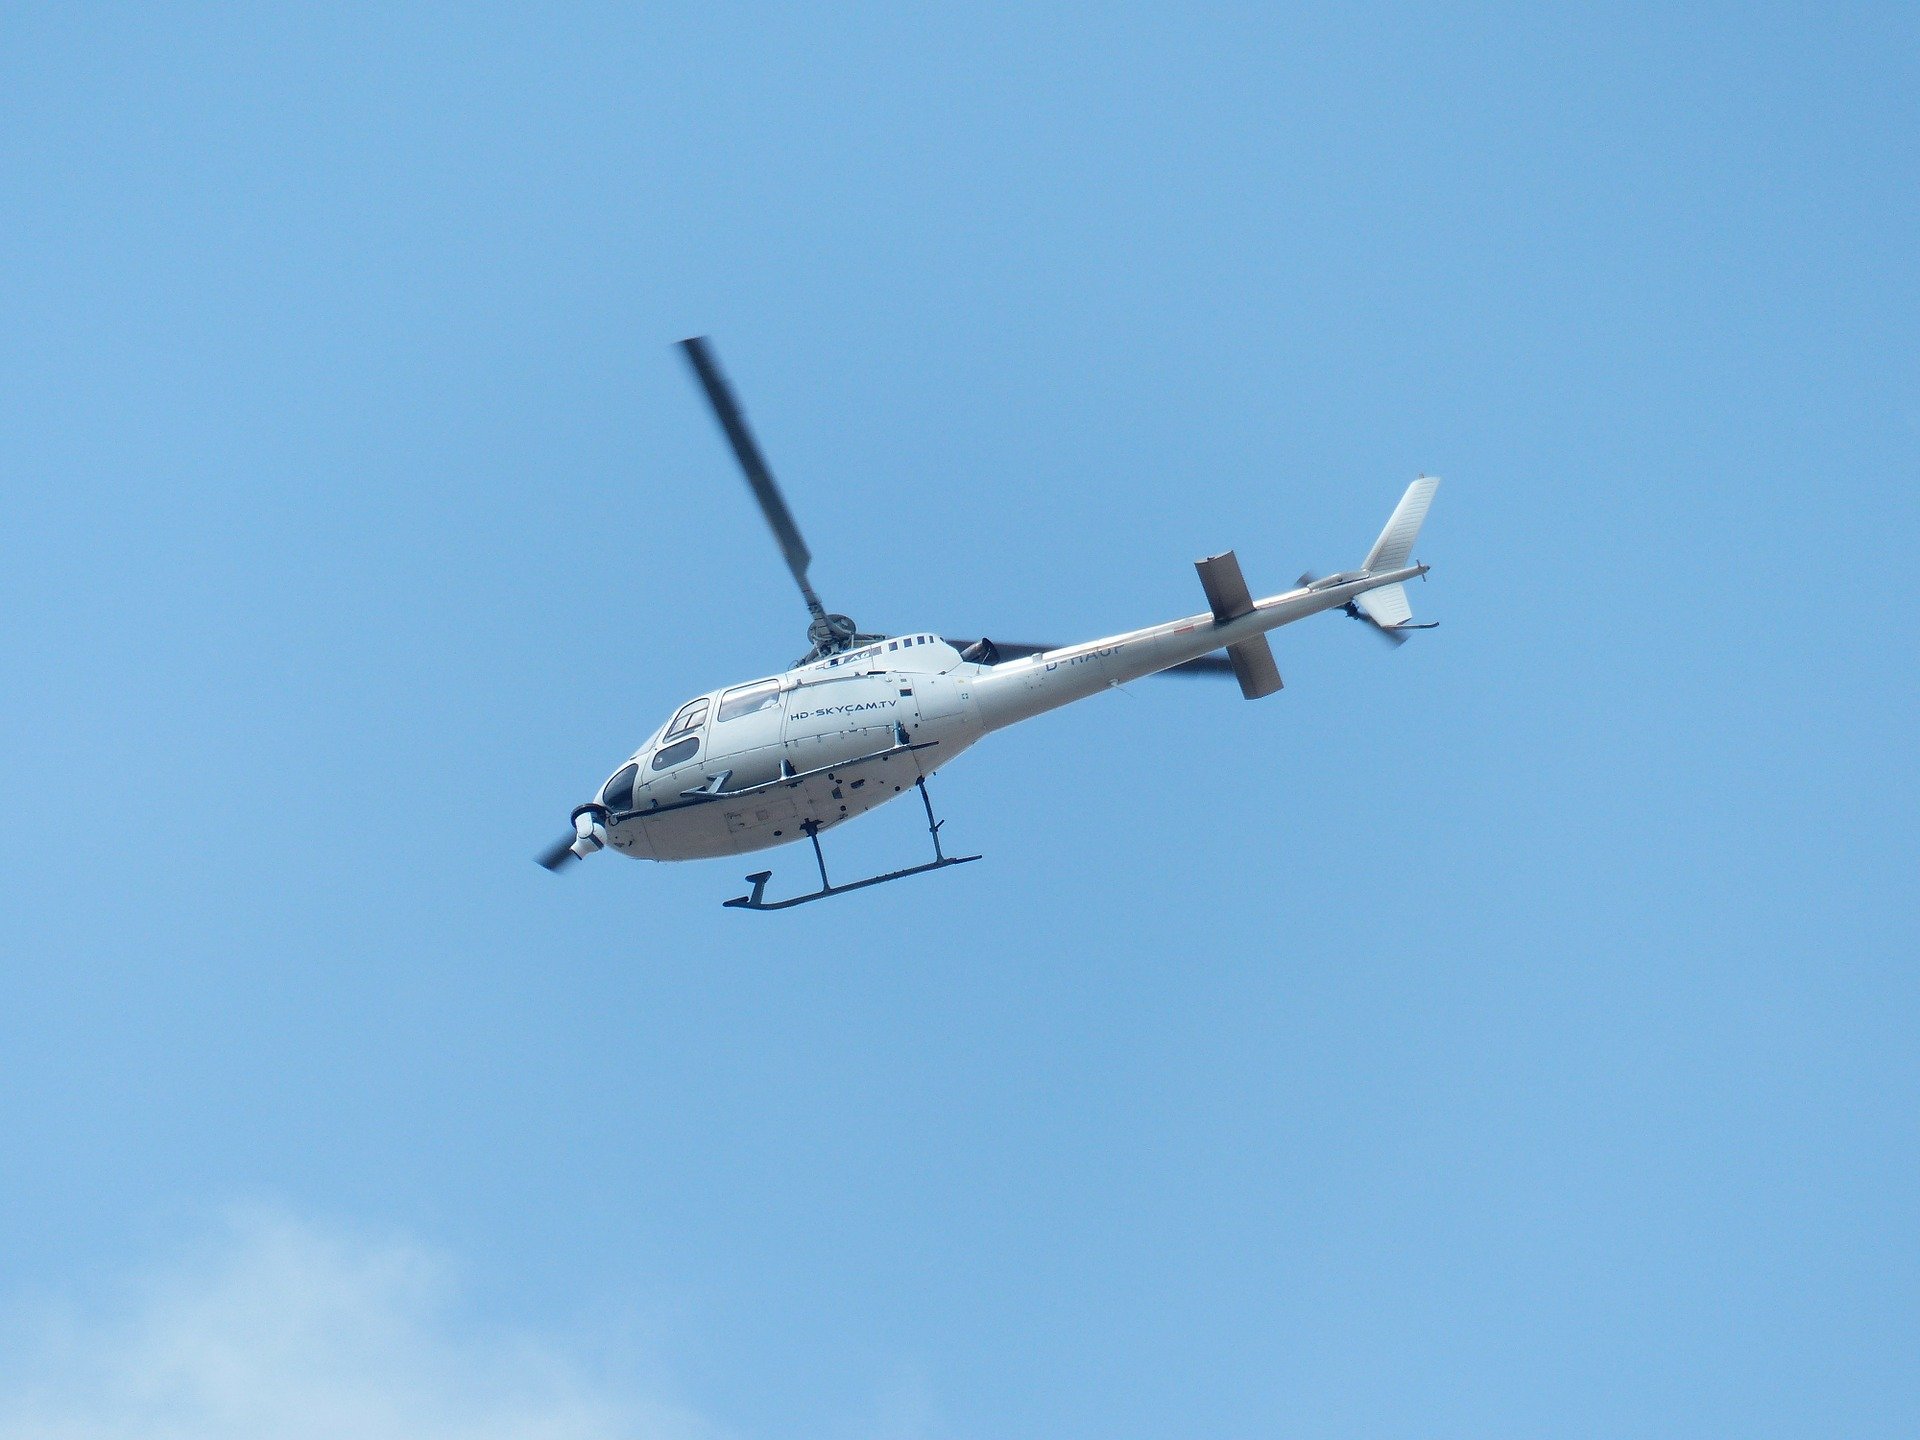 A helicopter monitoring | Source: Pixabay